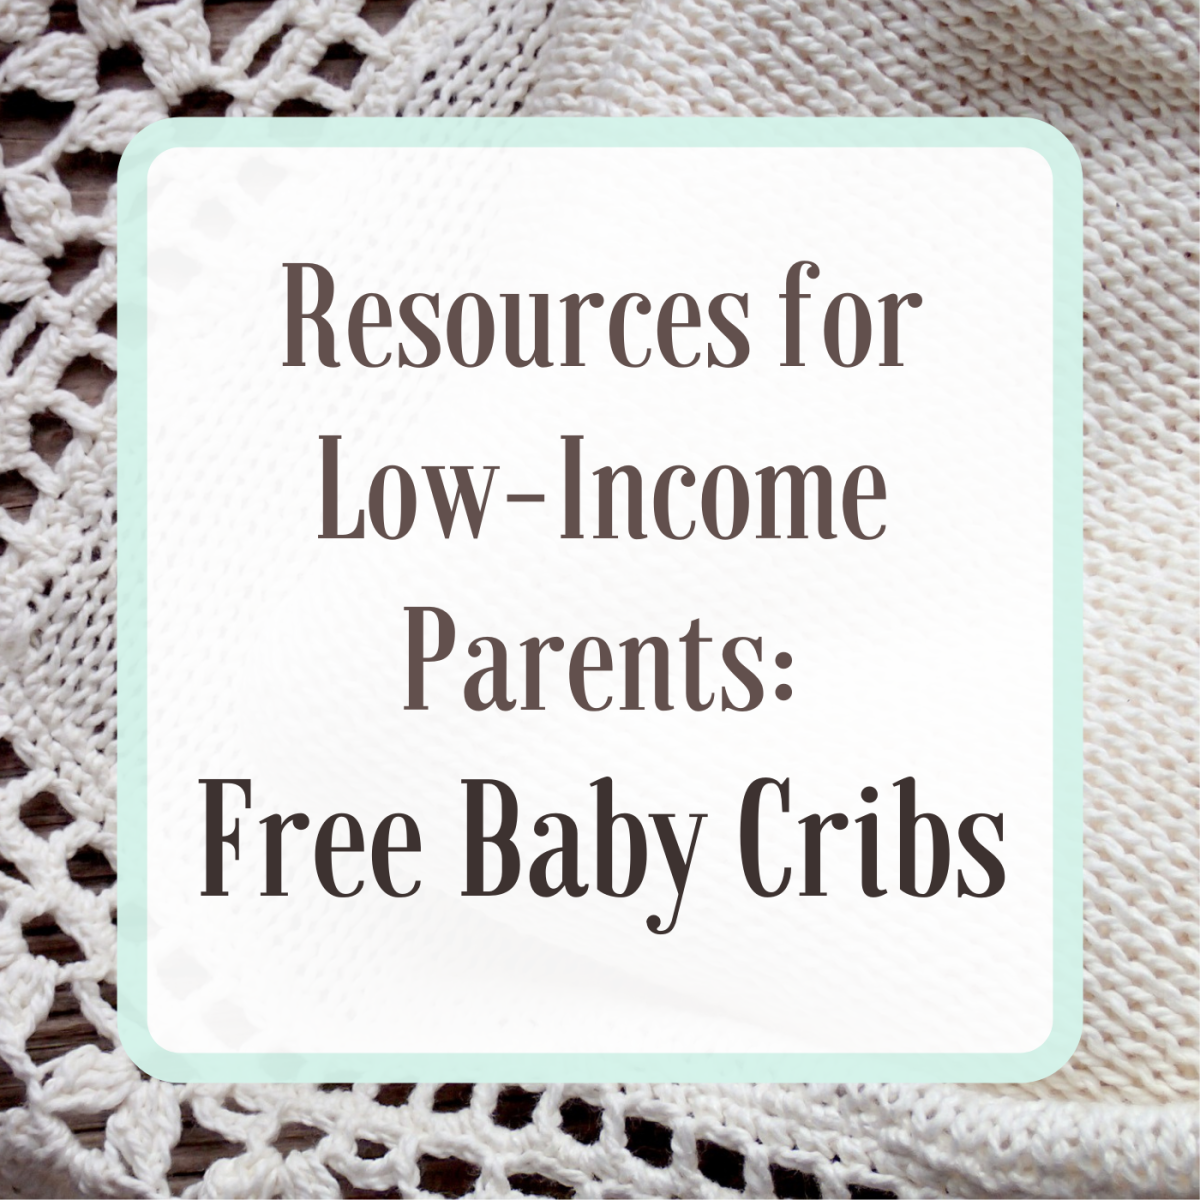 How to Get a Free Baby Crib If You're a Low-Income Family